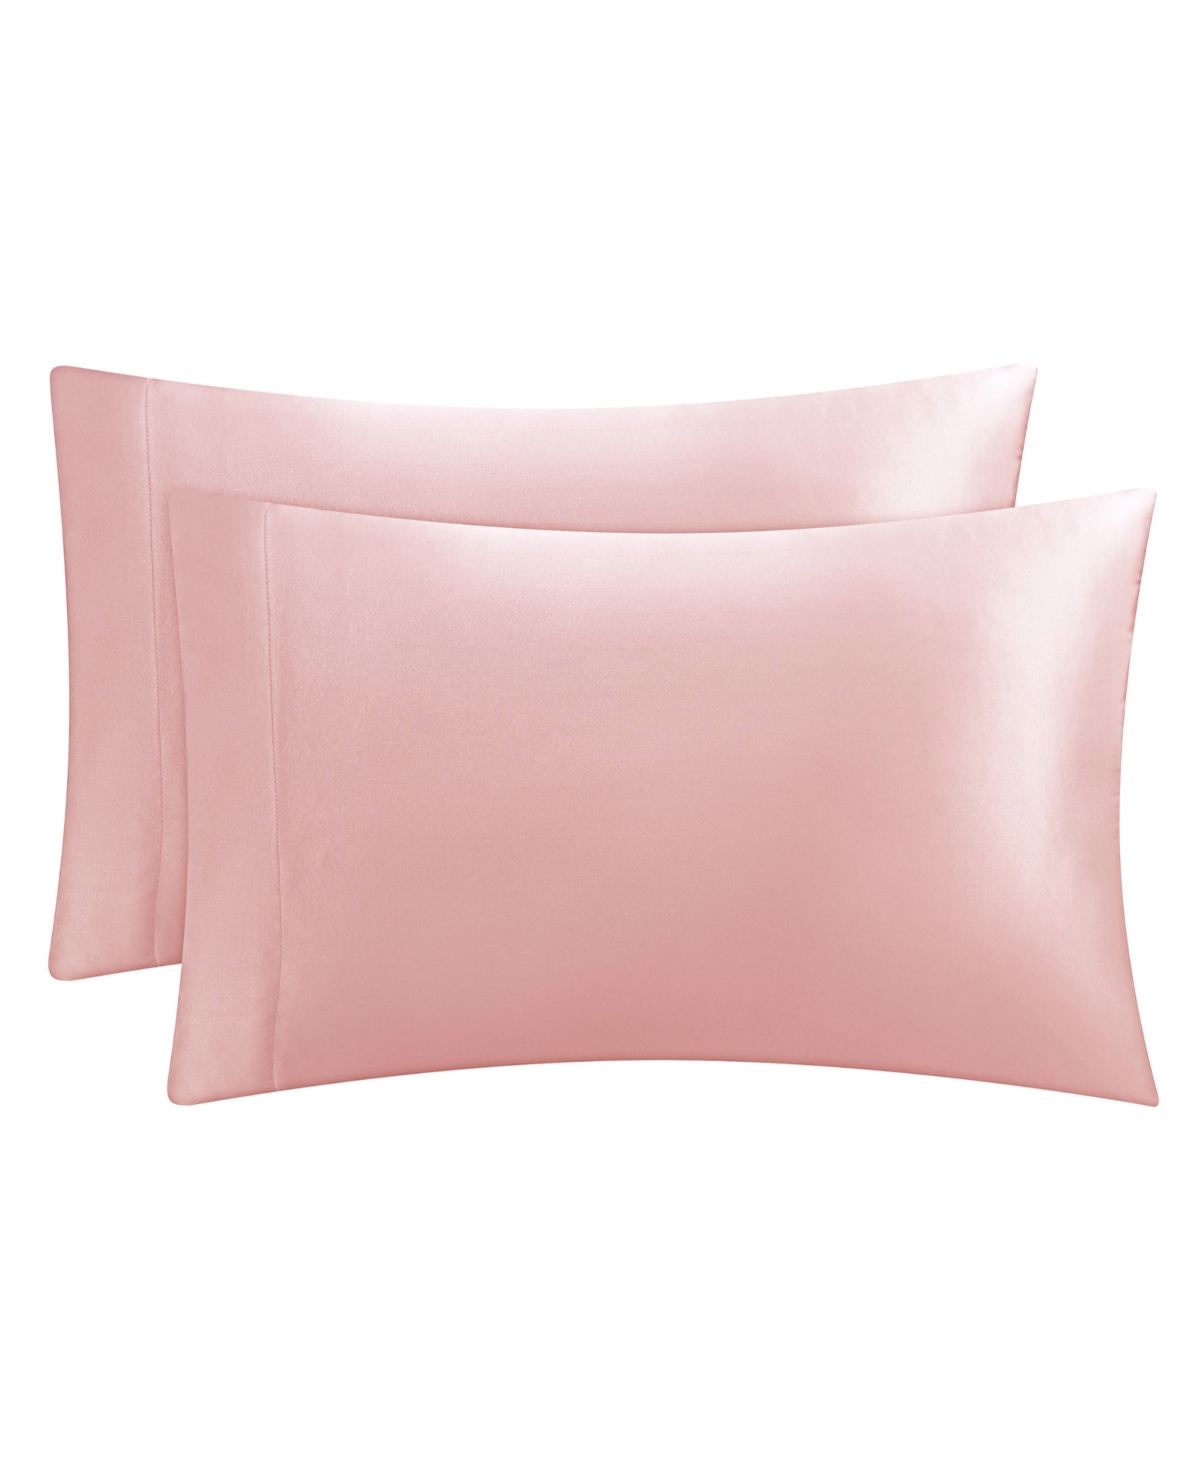 Juicy Couture Satin 2 Piece Pillow Case Set, King In Pink